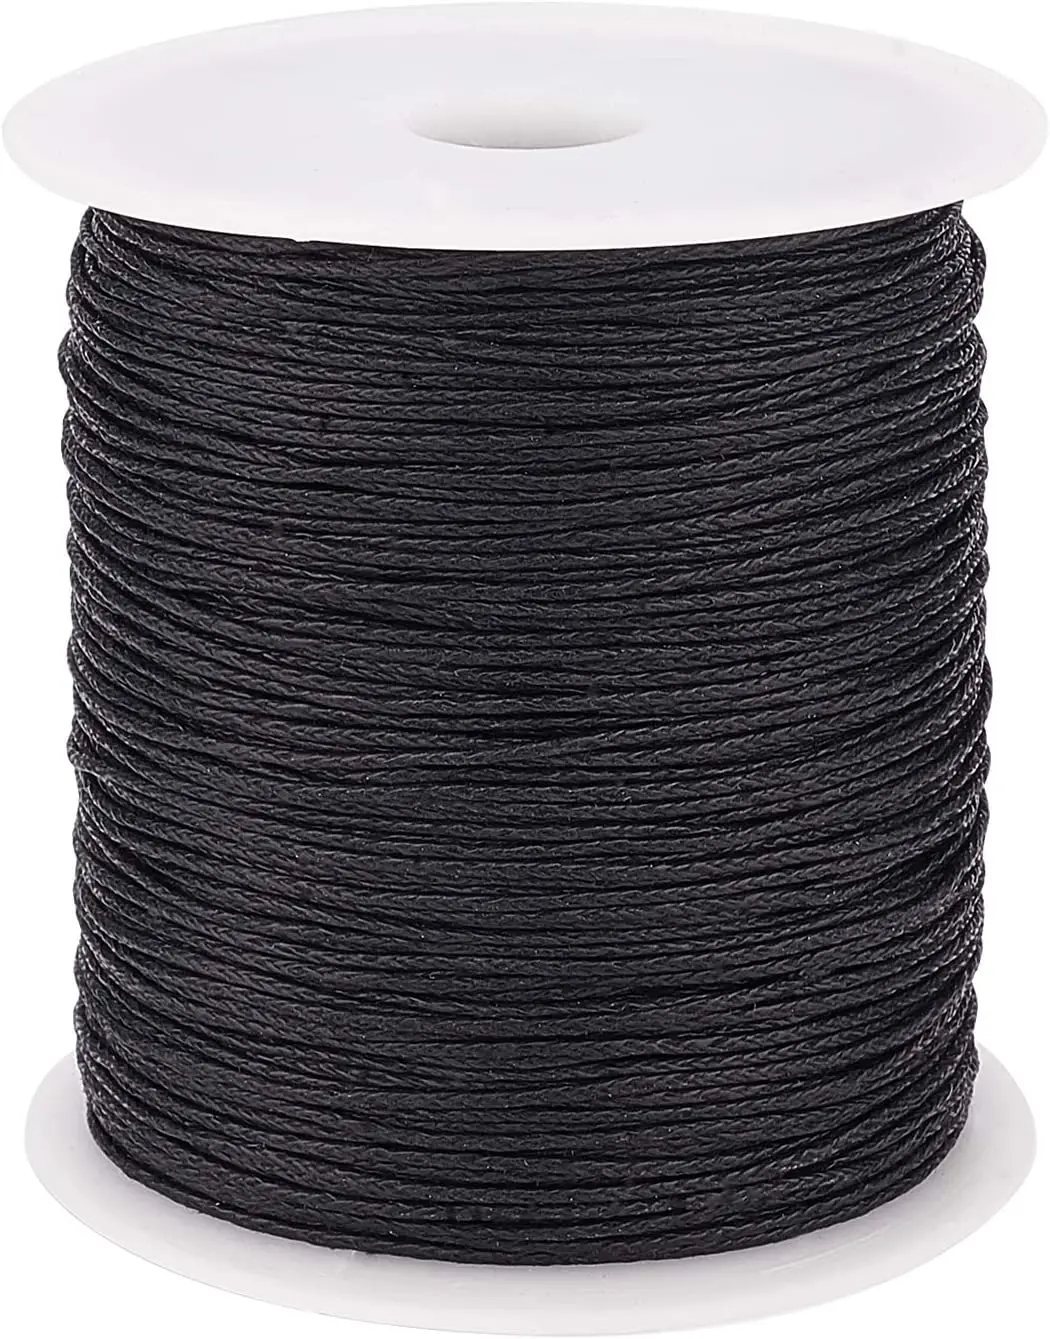 

200 Yards 1mm Waxed Cotton Cord Thread Beading String for Bracelet Necklace Jewelry Making and Macrame Supplies Black